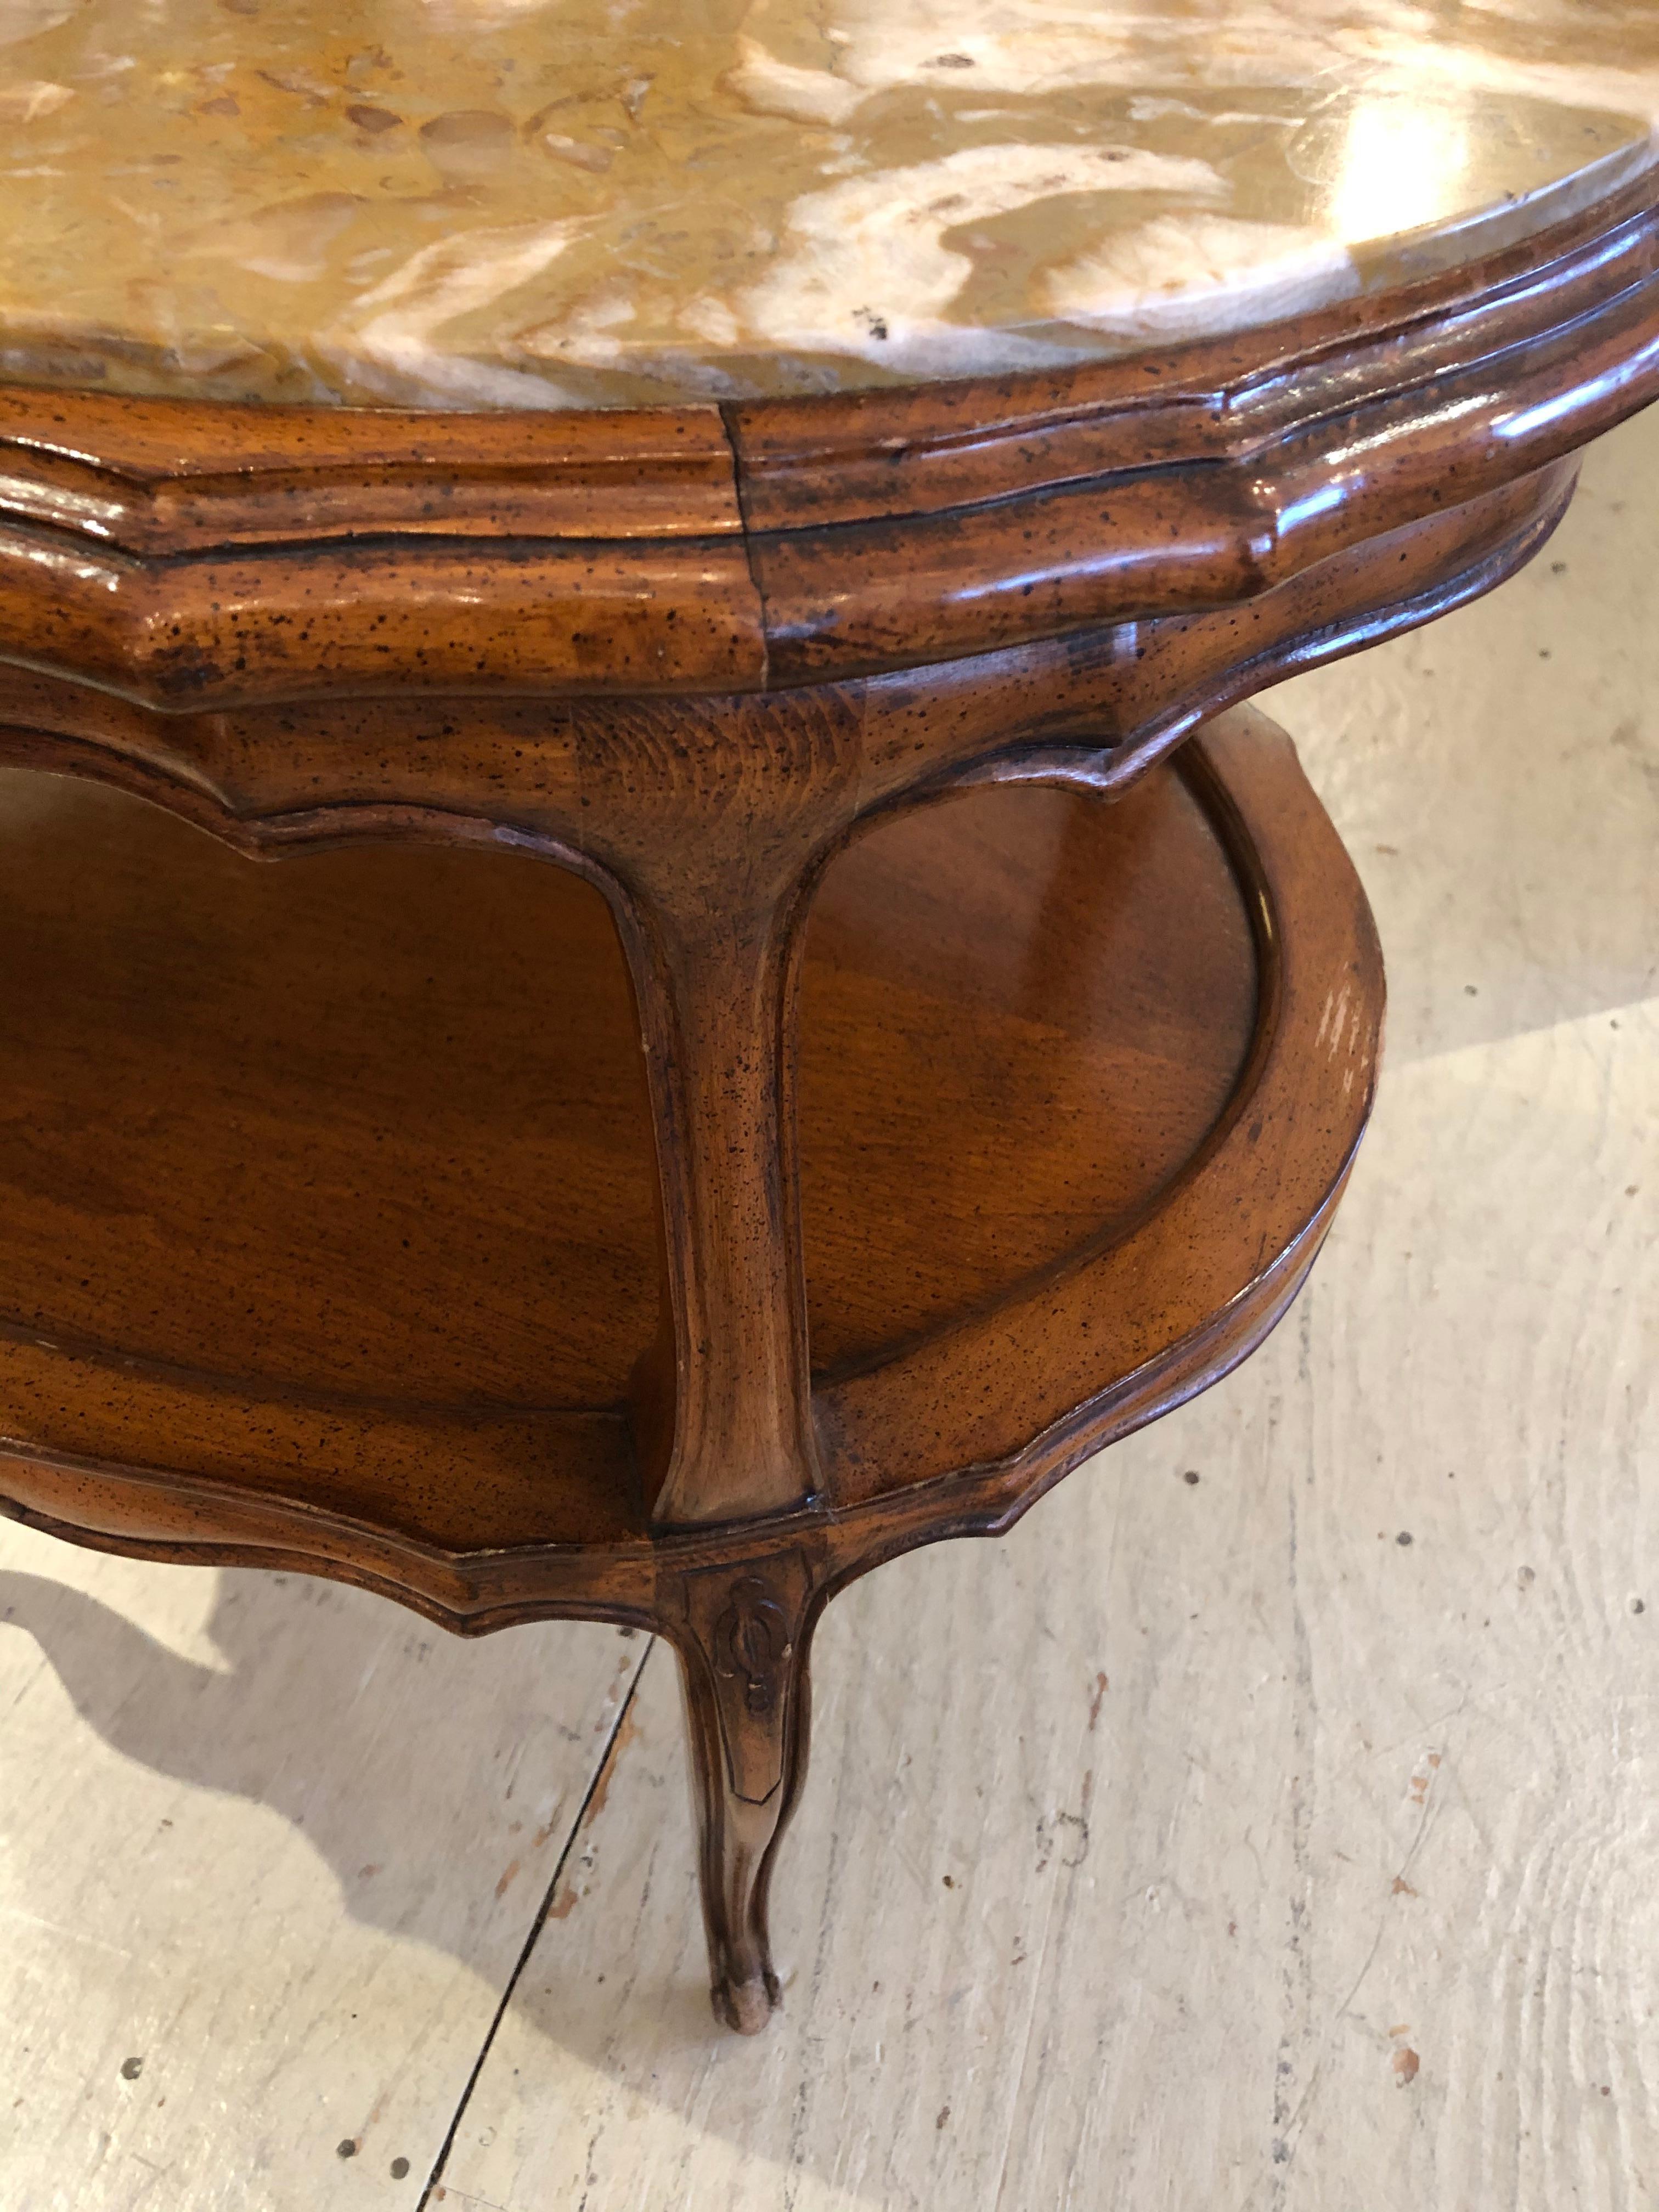 Refined French Provincial Style Marble Inset Two-Tier Fruitwood Oval Side Table For Sale 5